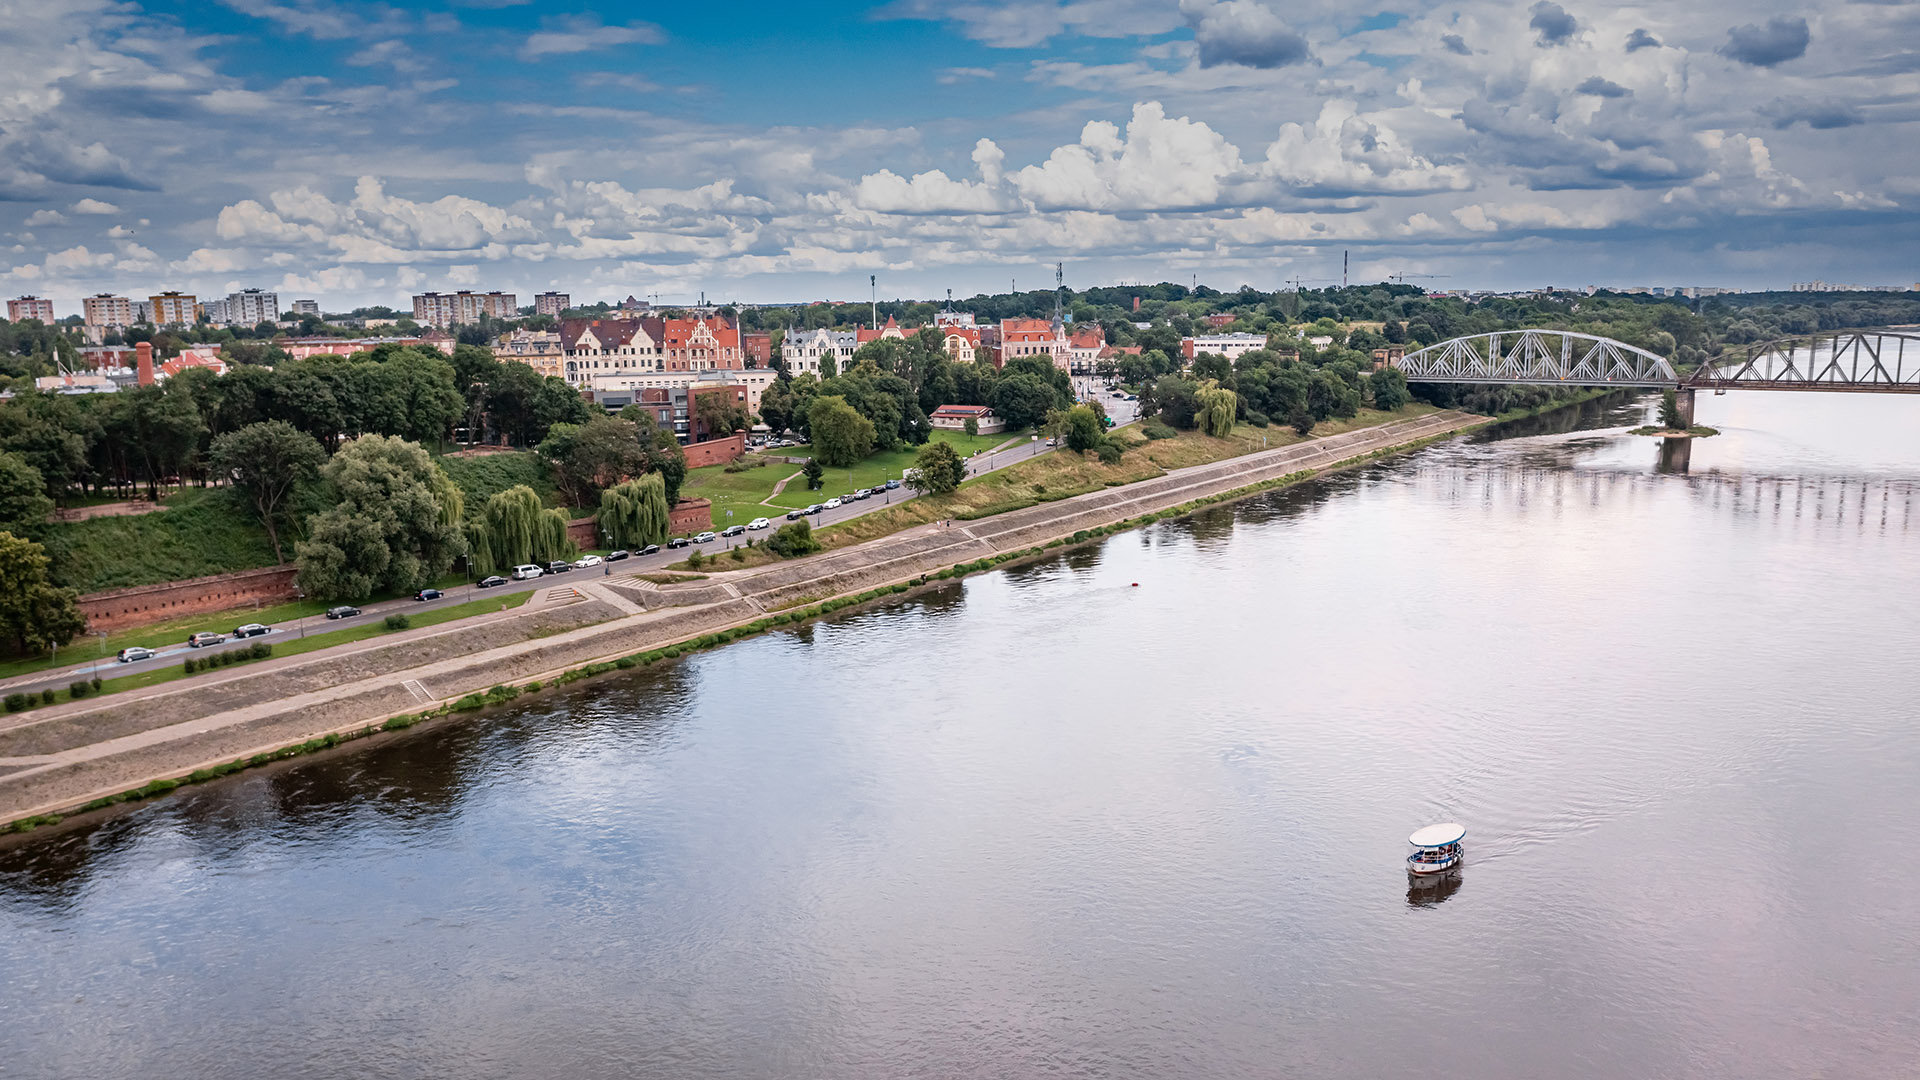 Aerial view of Torun old town and Vistula river. Architecture in Poland, Europe.